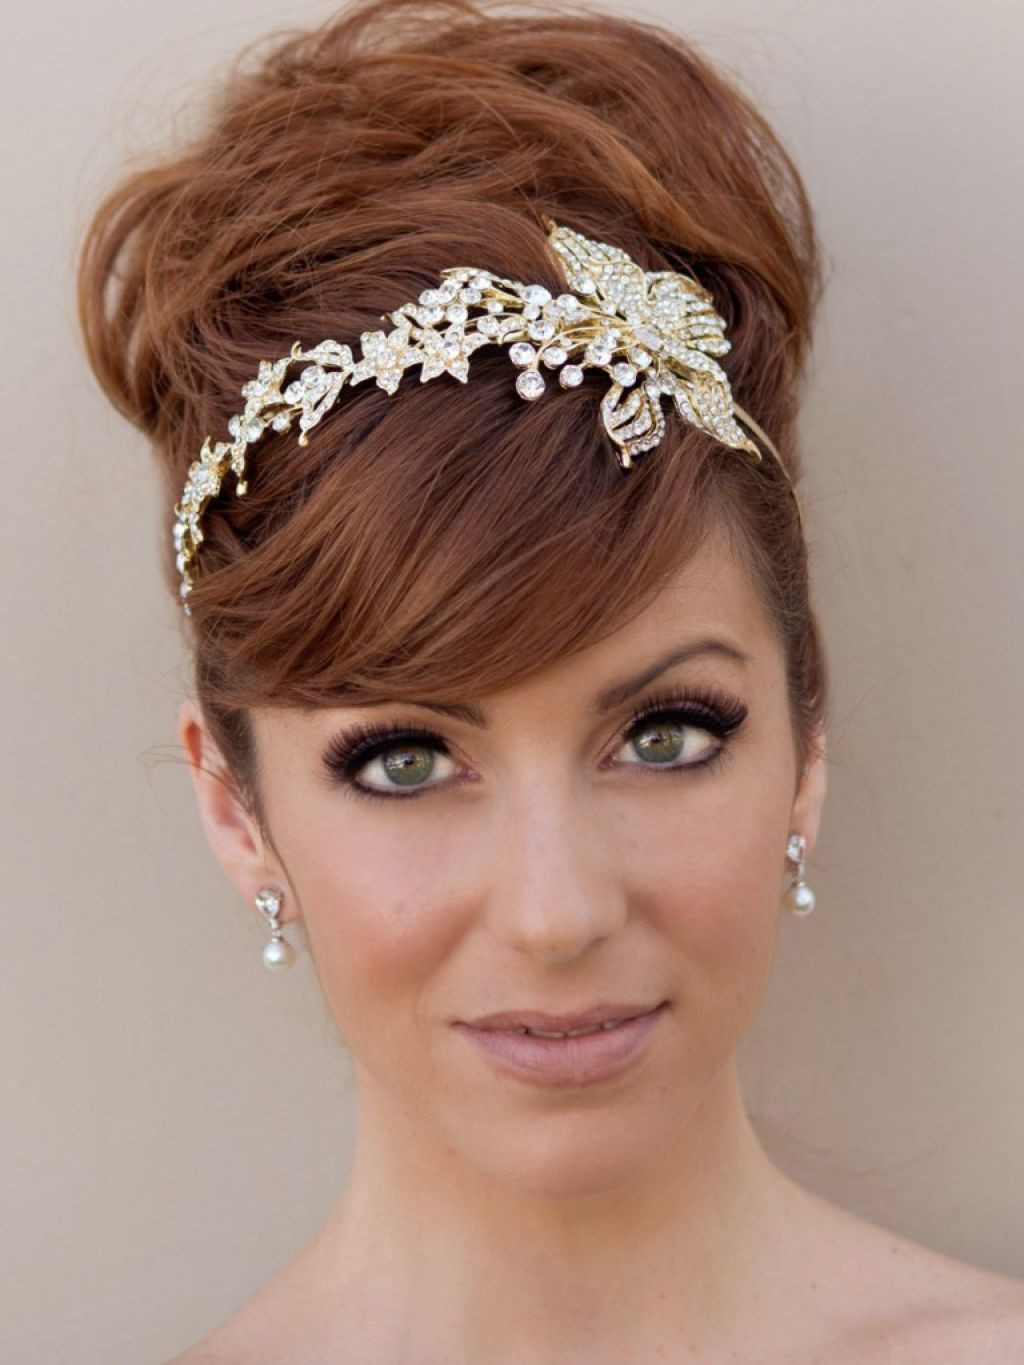 Wedding Hairstyles With Headpiece
 60 Wedding & Bridal Hairstyle Ideas Trends & Inspiration